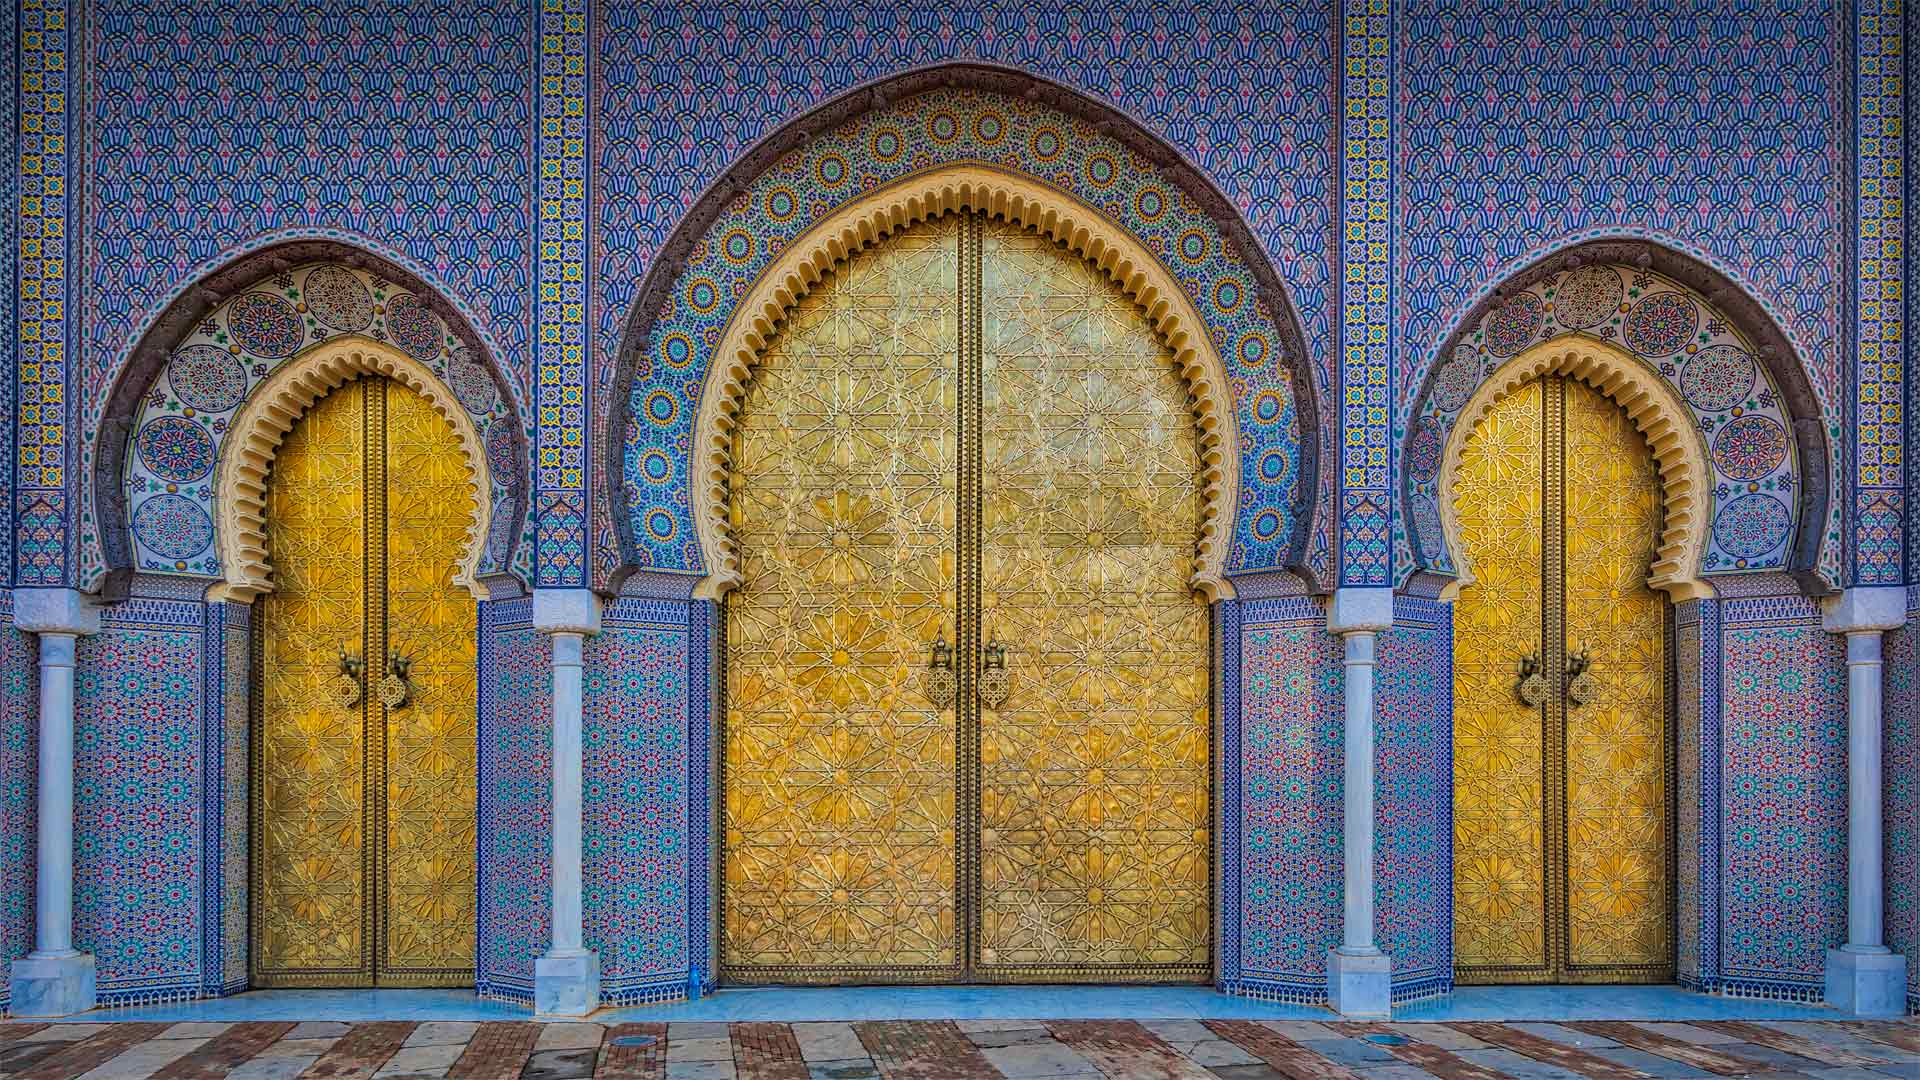 Islamic Architecture Architecture Door Pattern Ornamented Royal Palace Fez Morocco 1920x1080